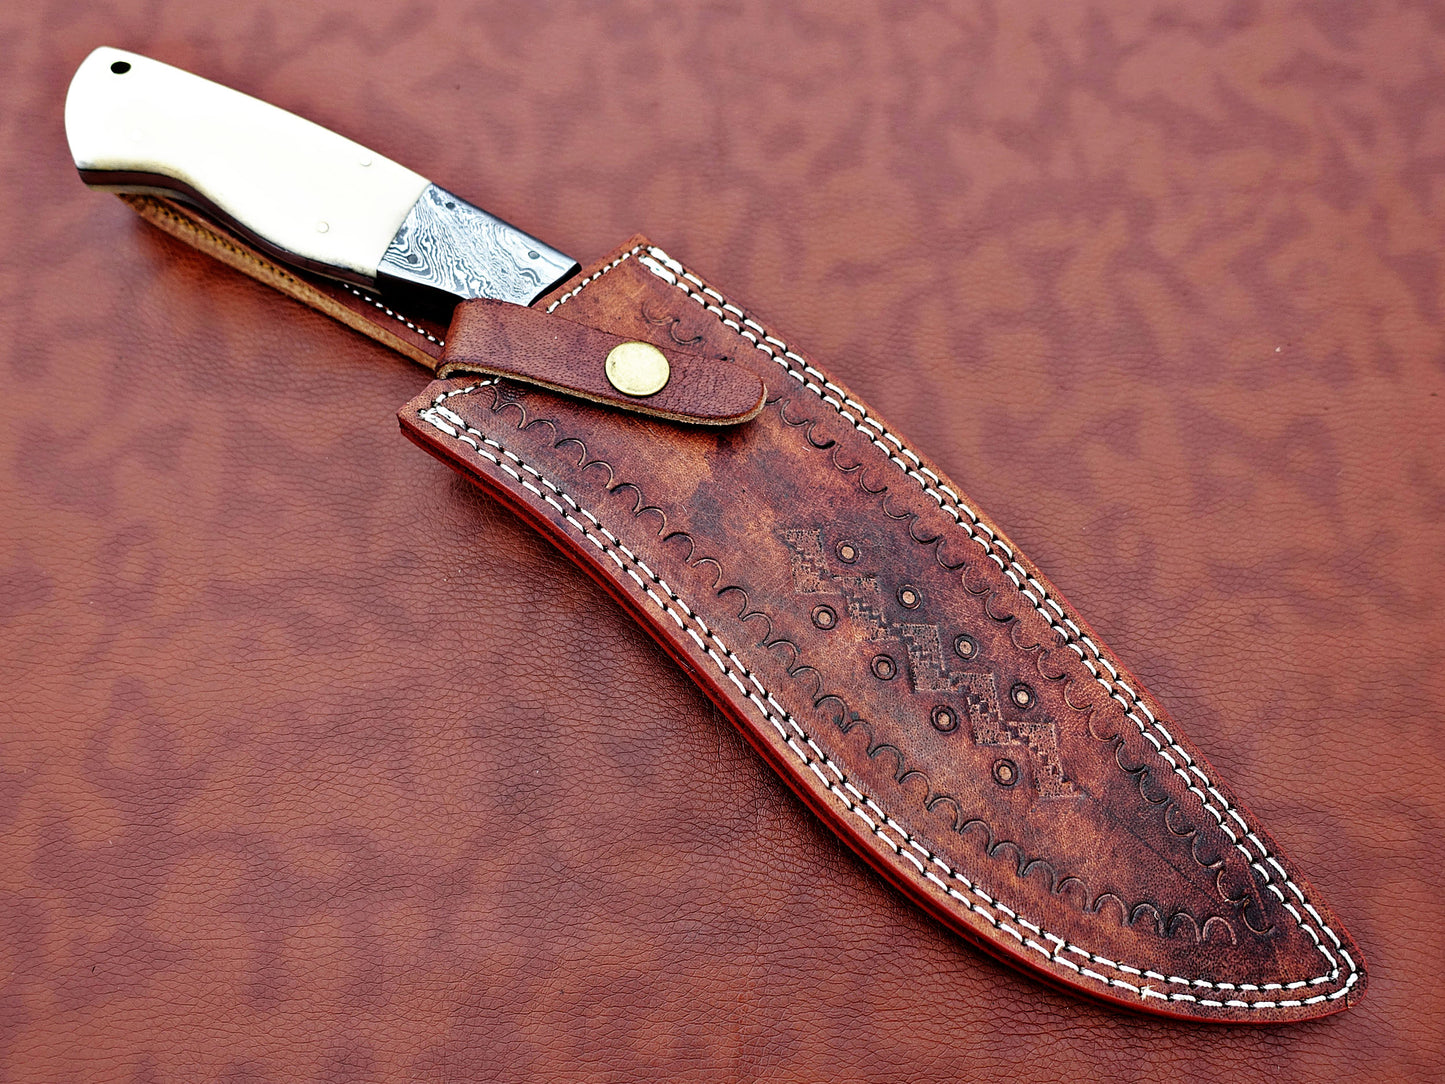 Damascus Steel Kukri Knife 14 Inches custom made Hand Forged With 9" long blade, Stag Antler scale, Cow Leather Sheath